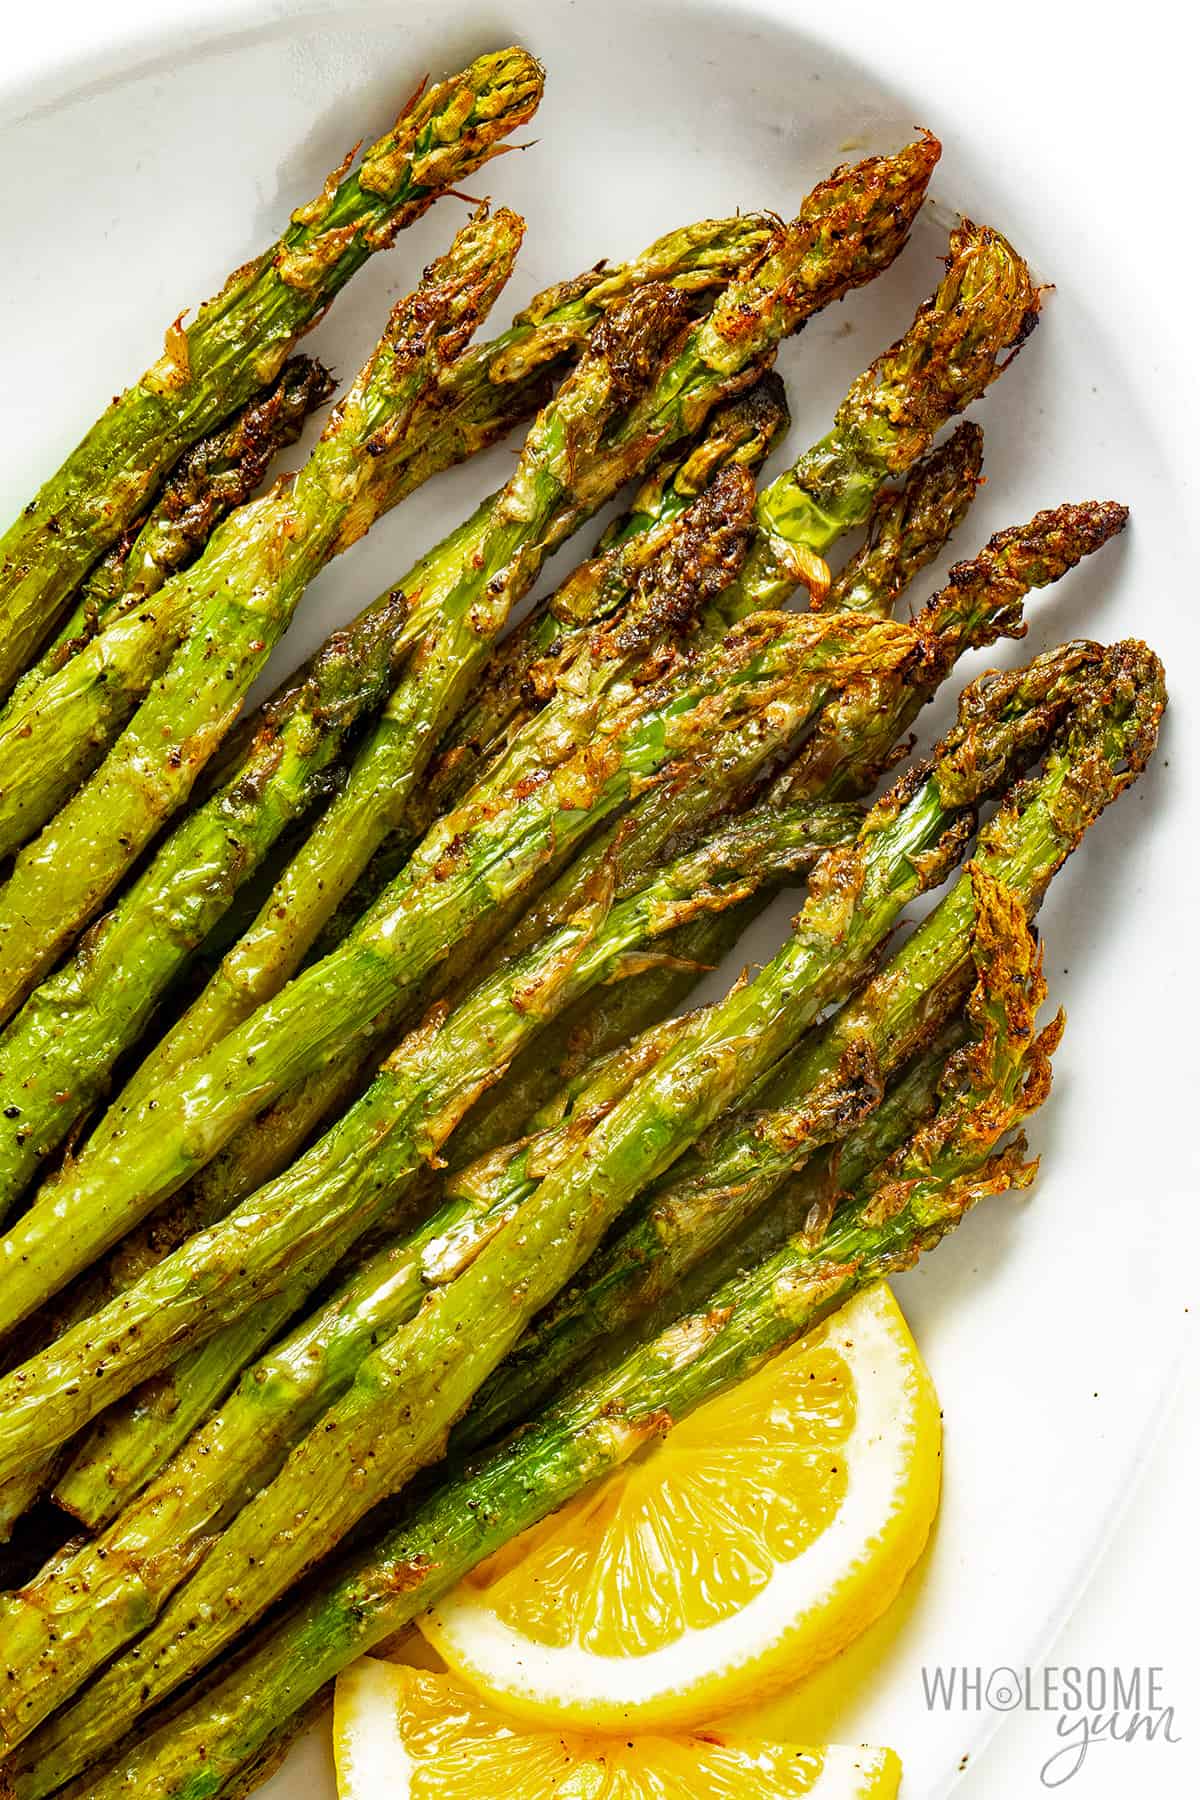 Plate of asparagus cooked in air fryer with lemon wedges.